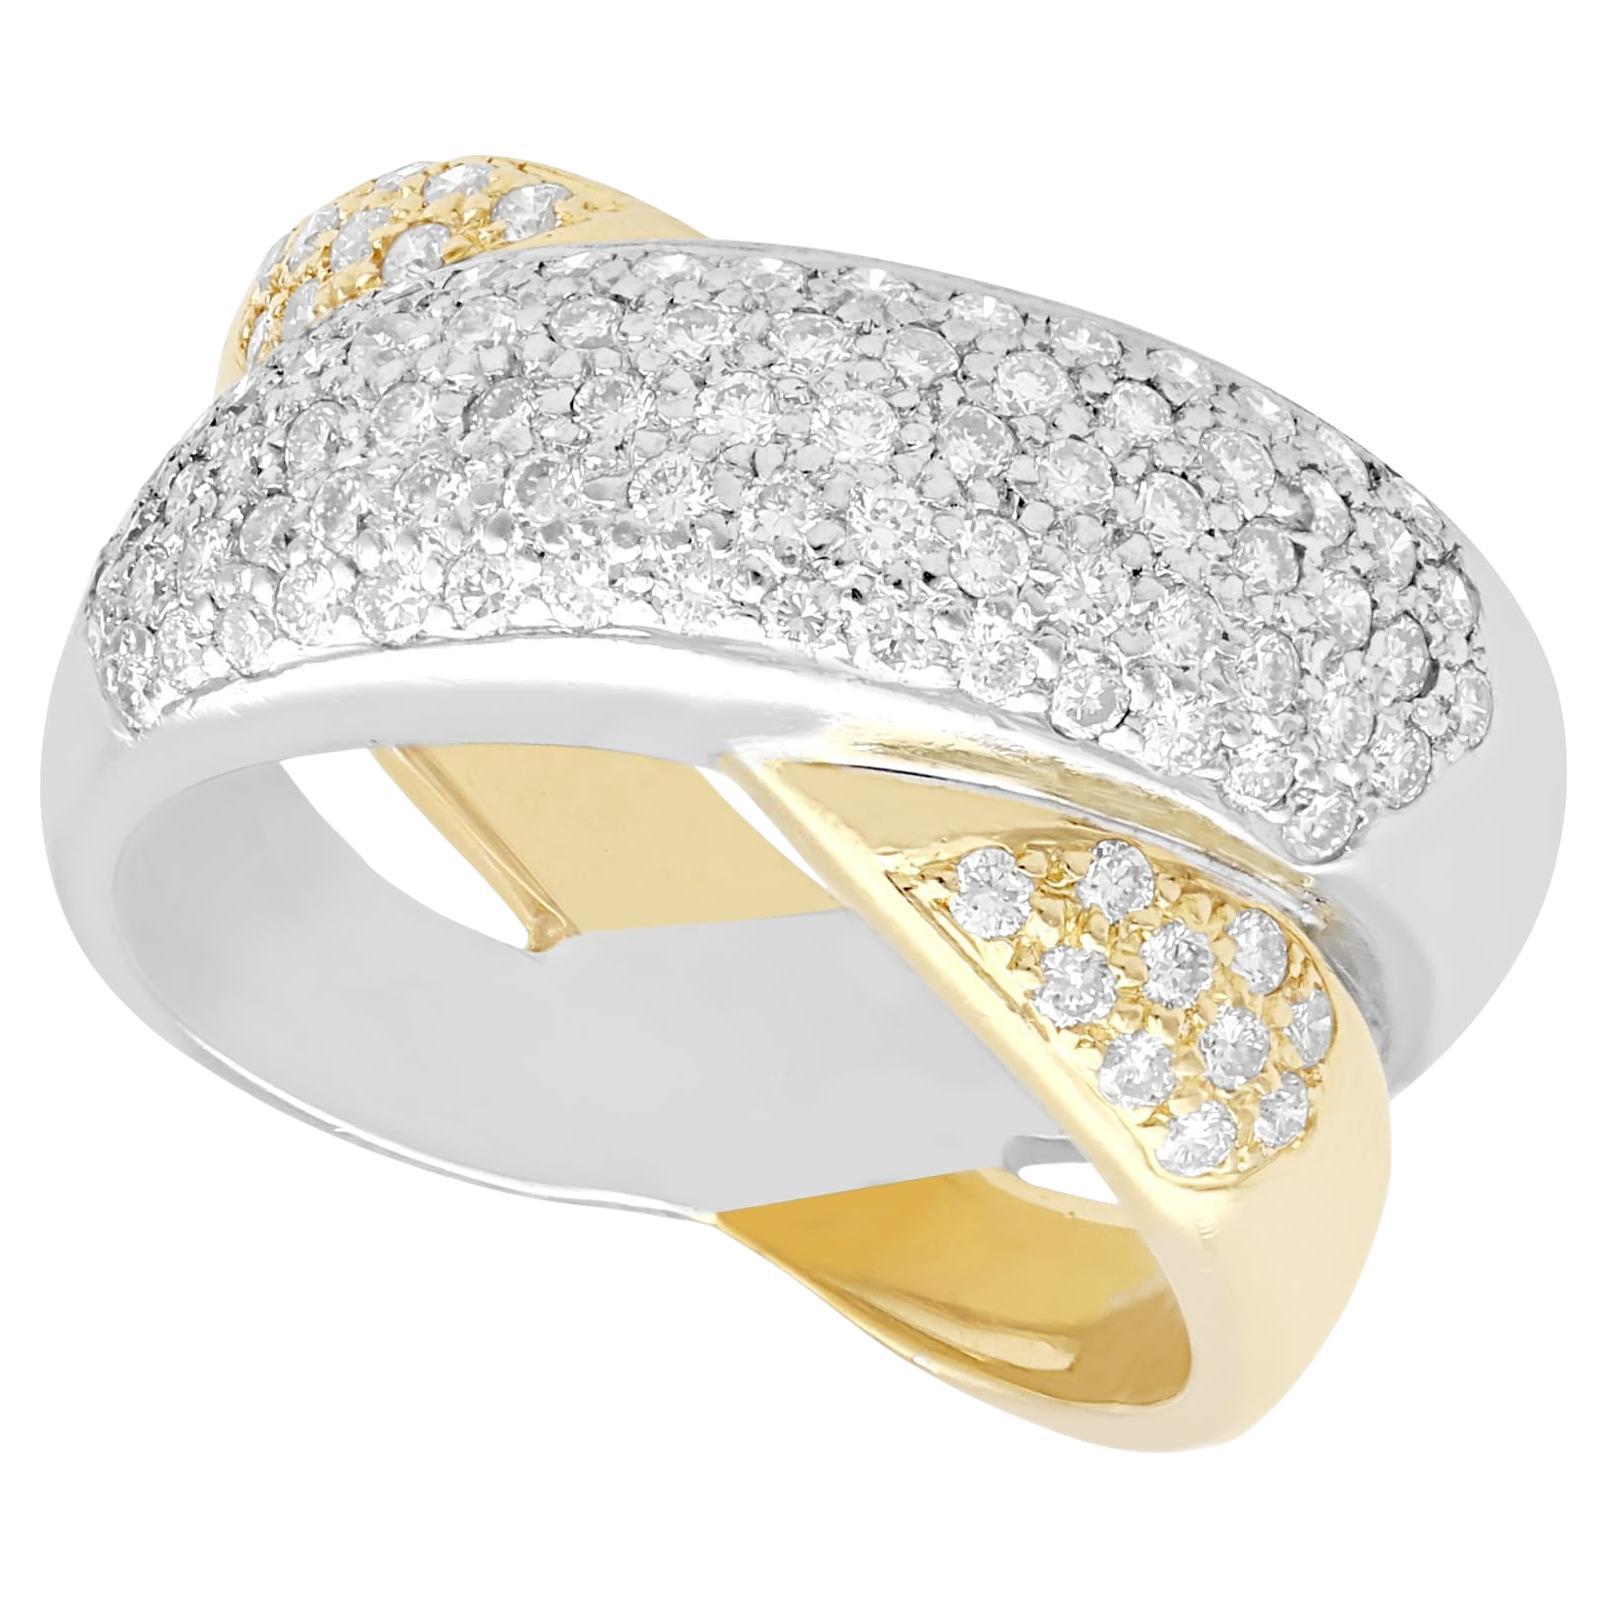 0.52 Carat Diamond 18k Yellow and White Gold Cocktail Ring